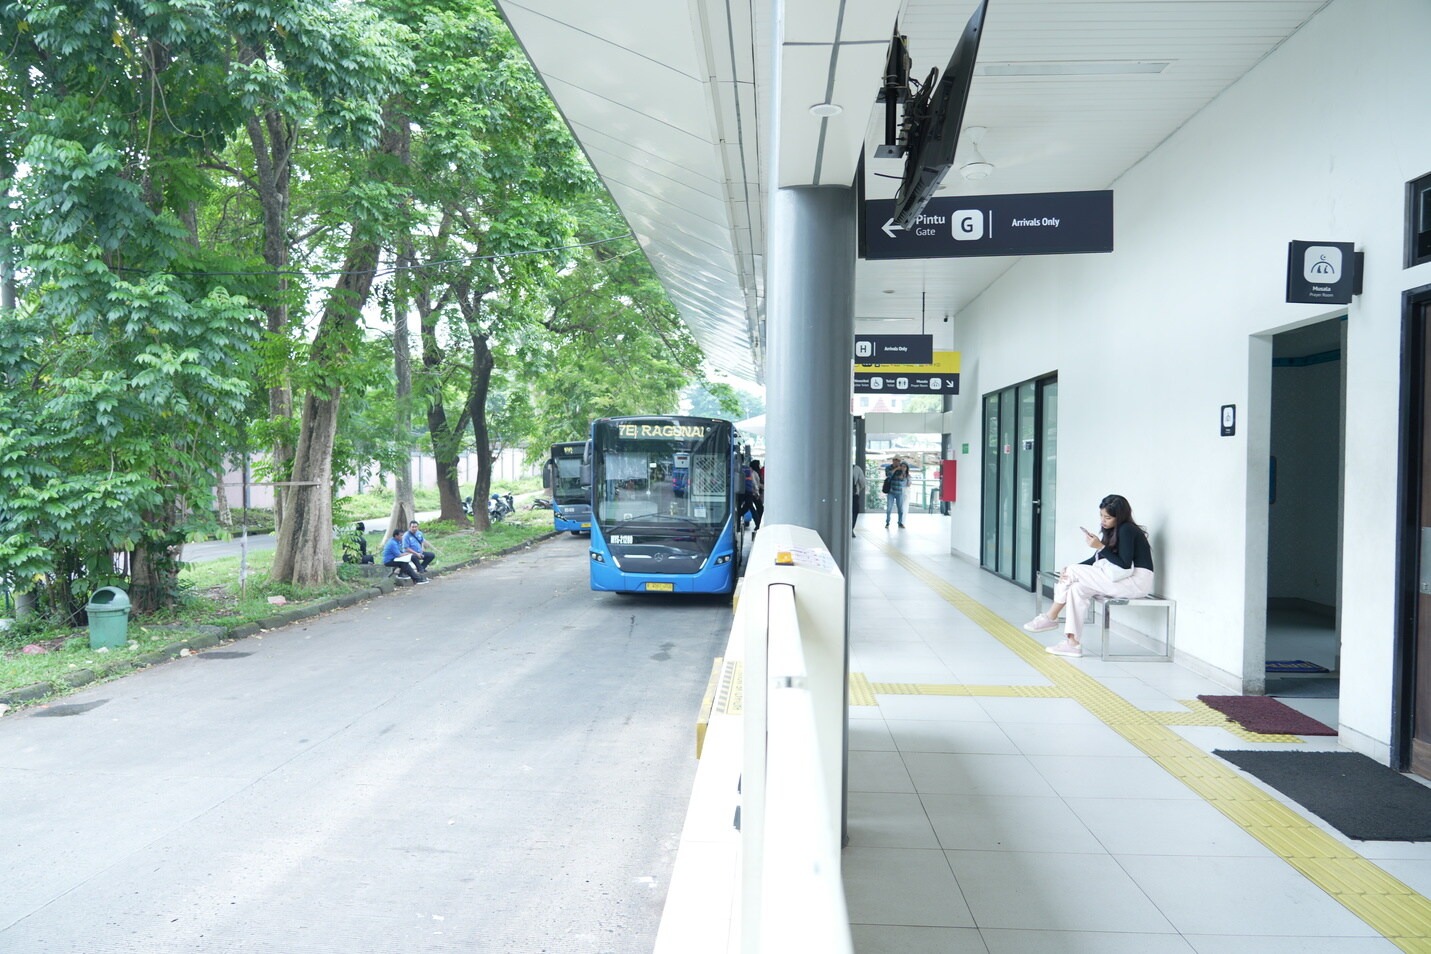 Transjakarta and JakLingko routes have undergone adjustments. As a loyal user of this public transportation, let's check out their latest routes!